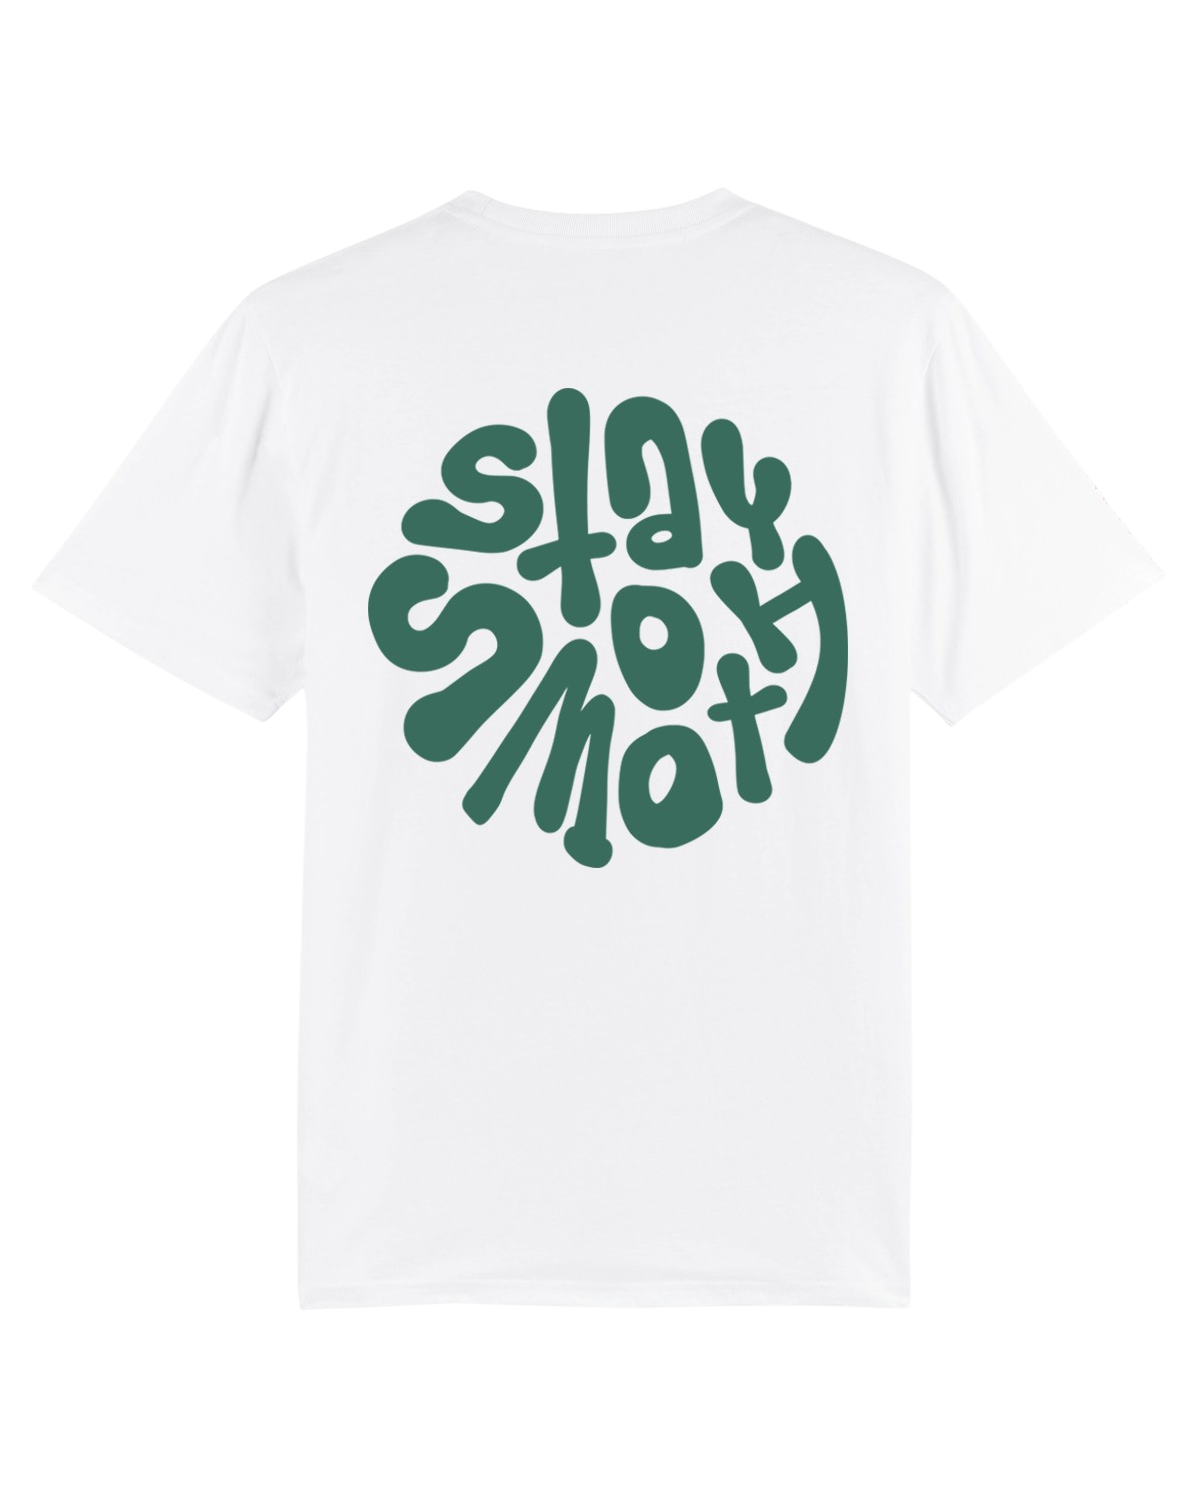 White Kids T / Stay Smooth Green Front+Back Girls